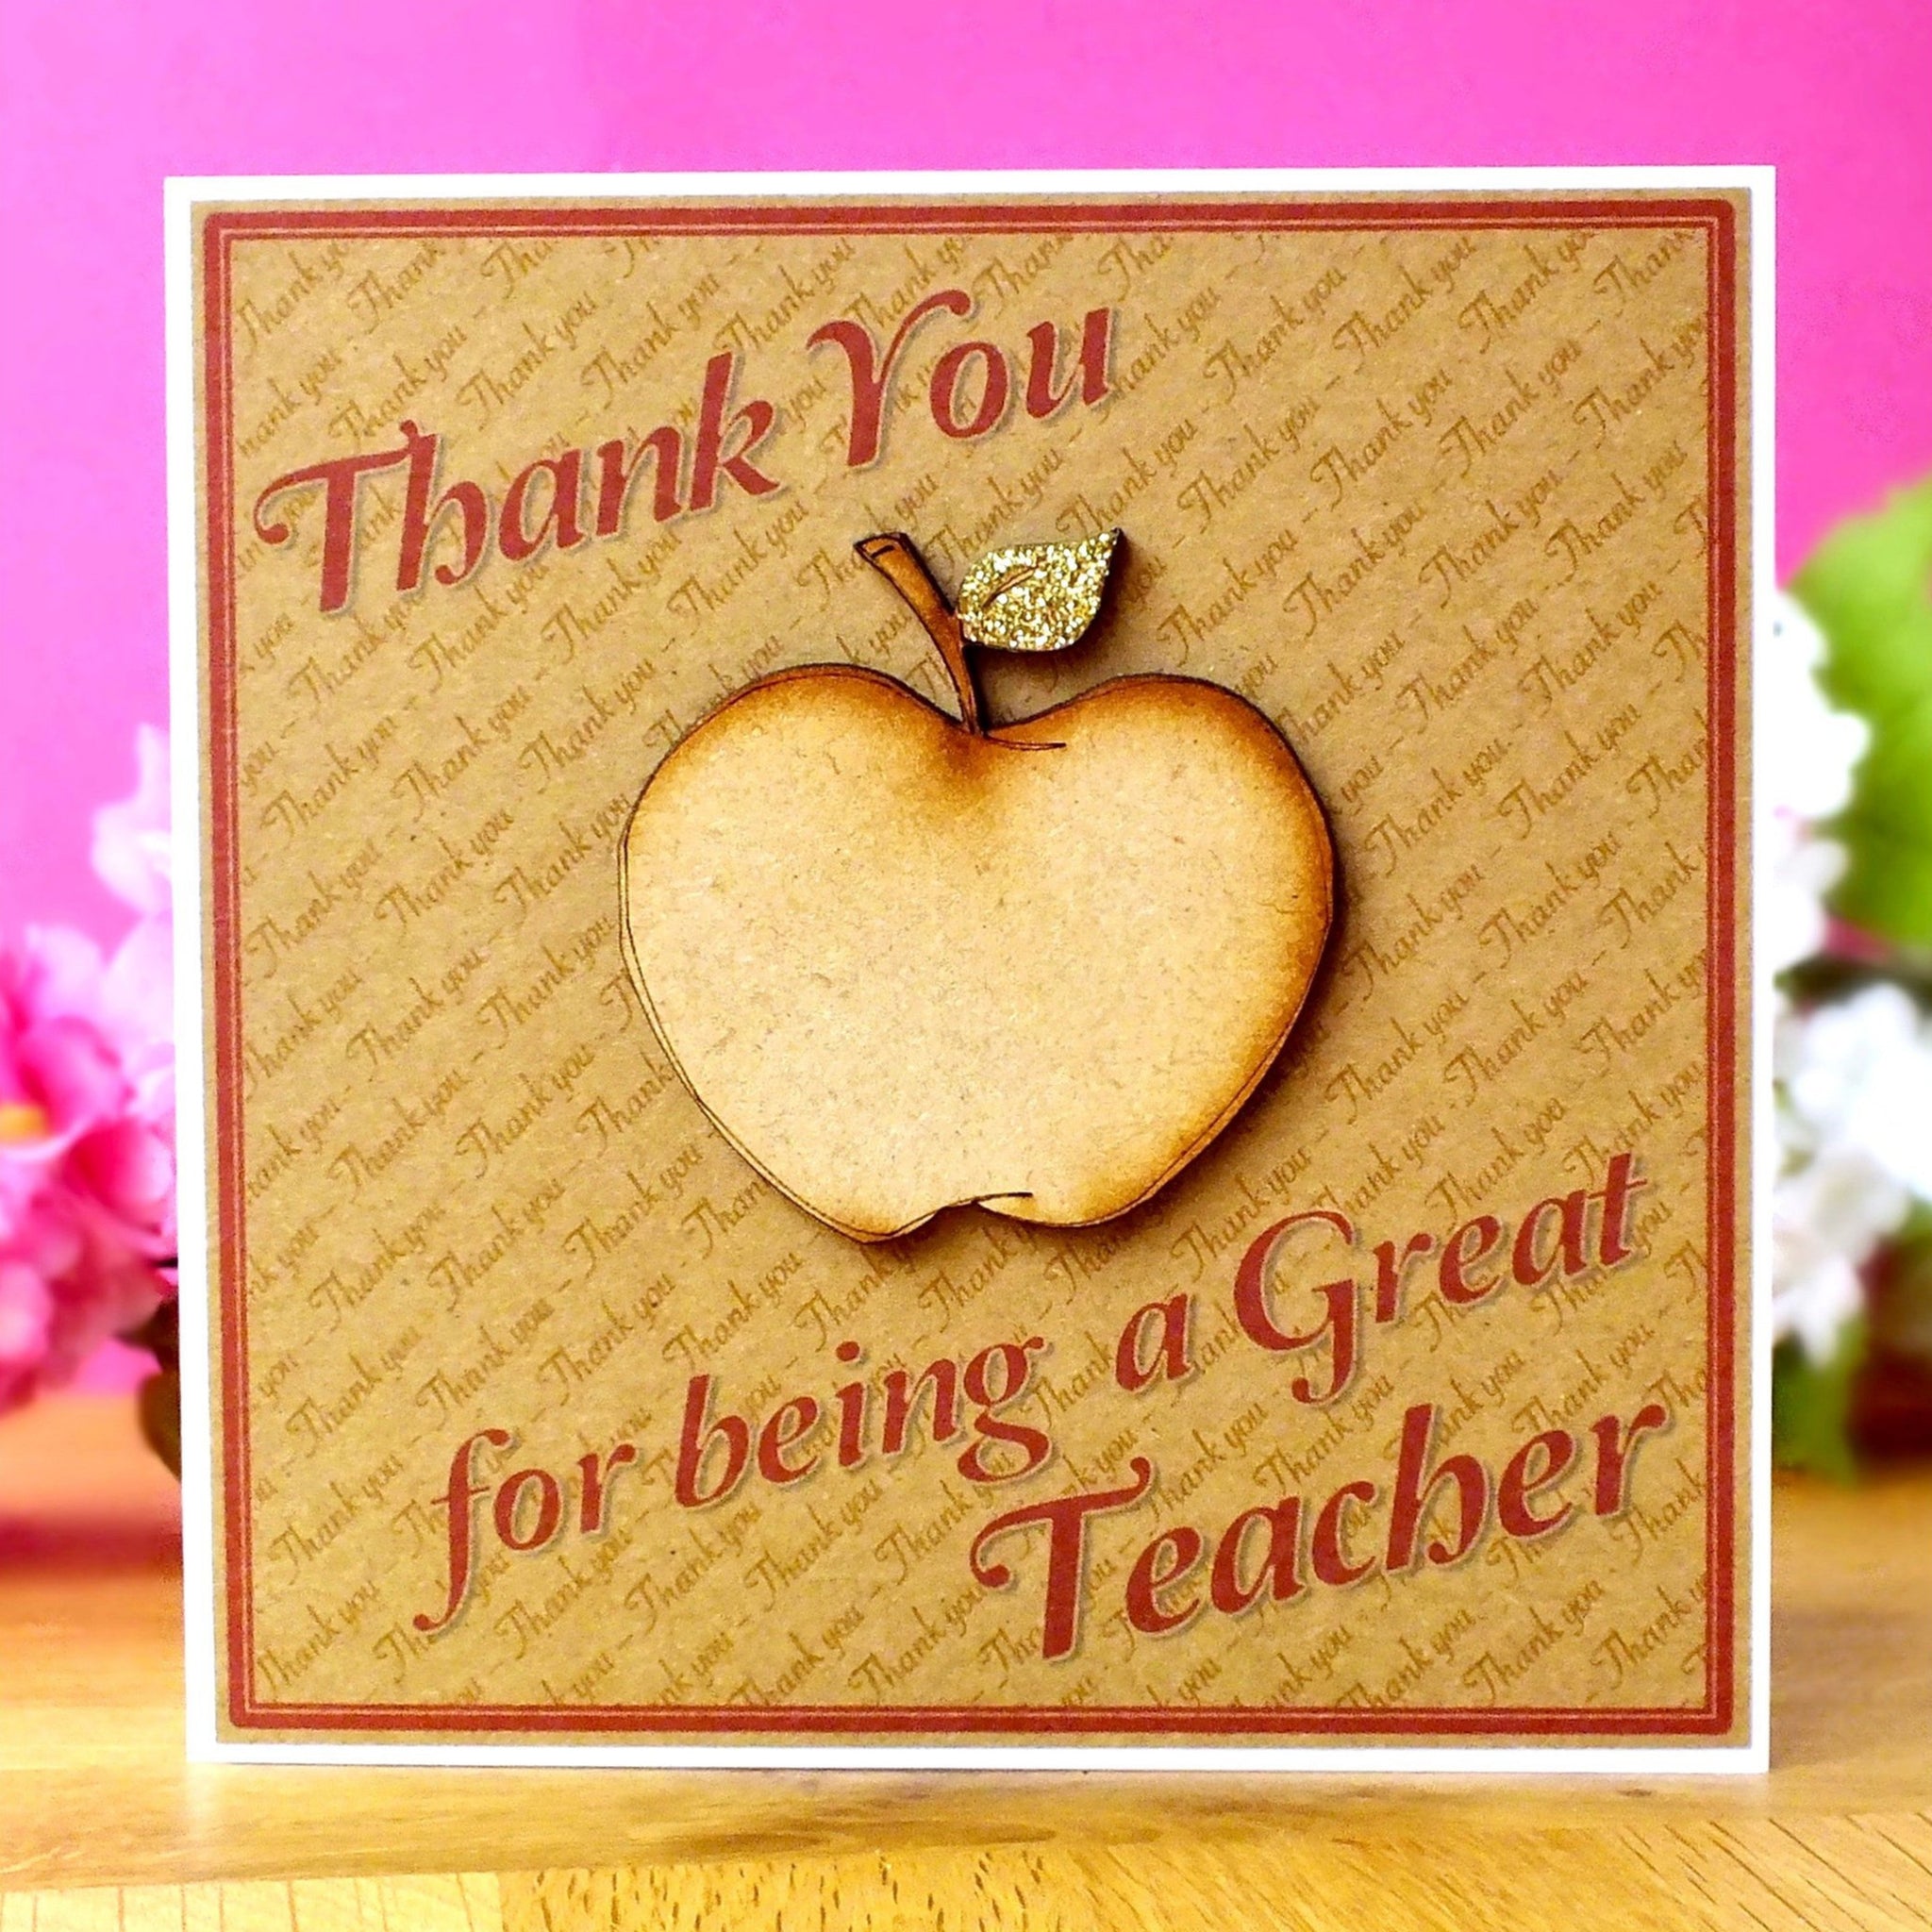 Thank You for Being a Great Teacher Card Main